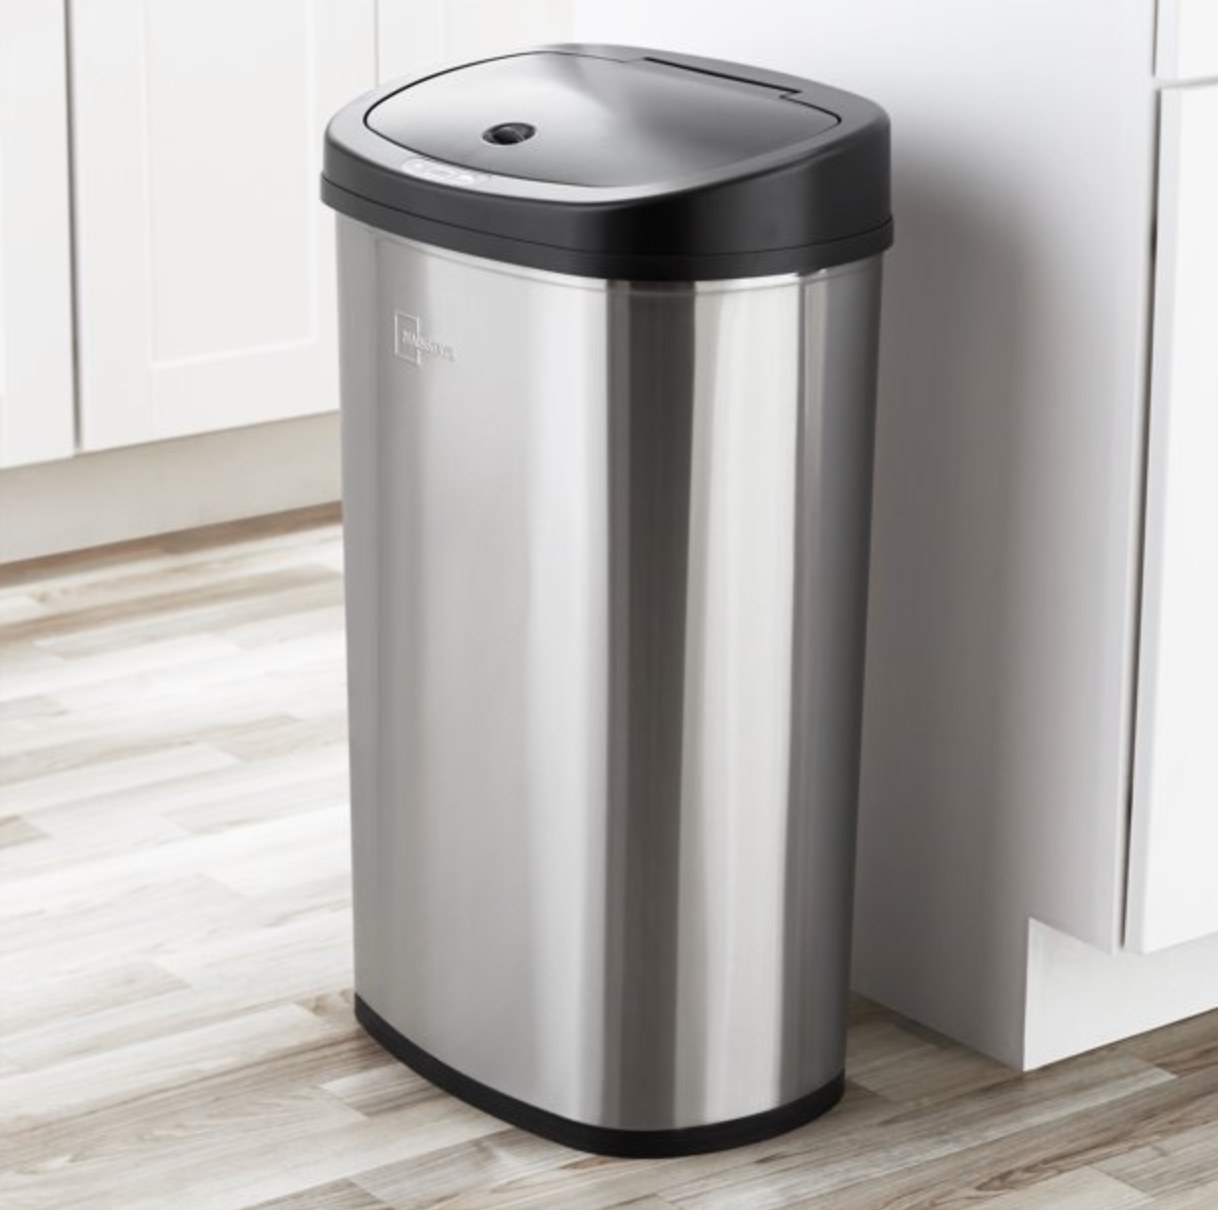 the silver trash can in a kitchen space